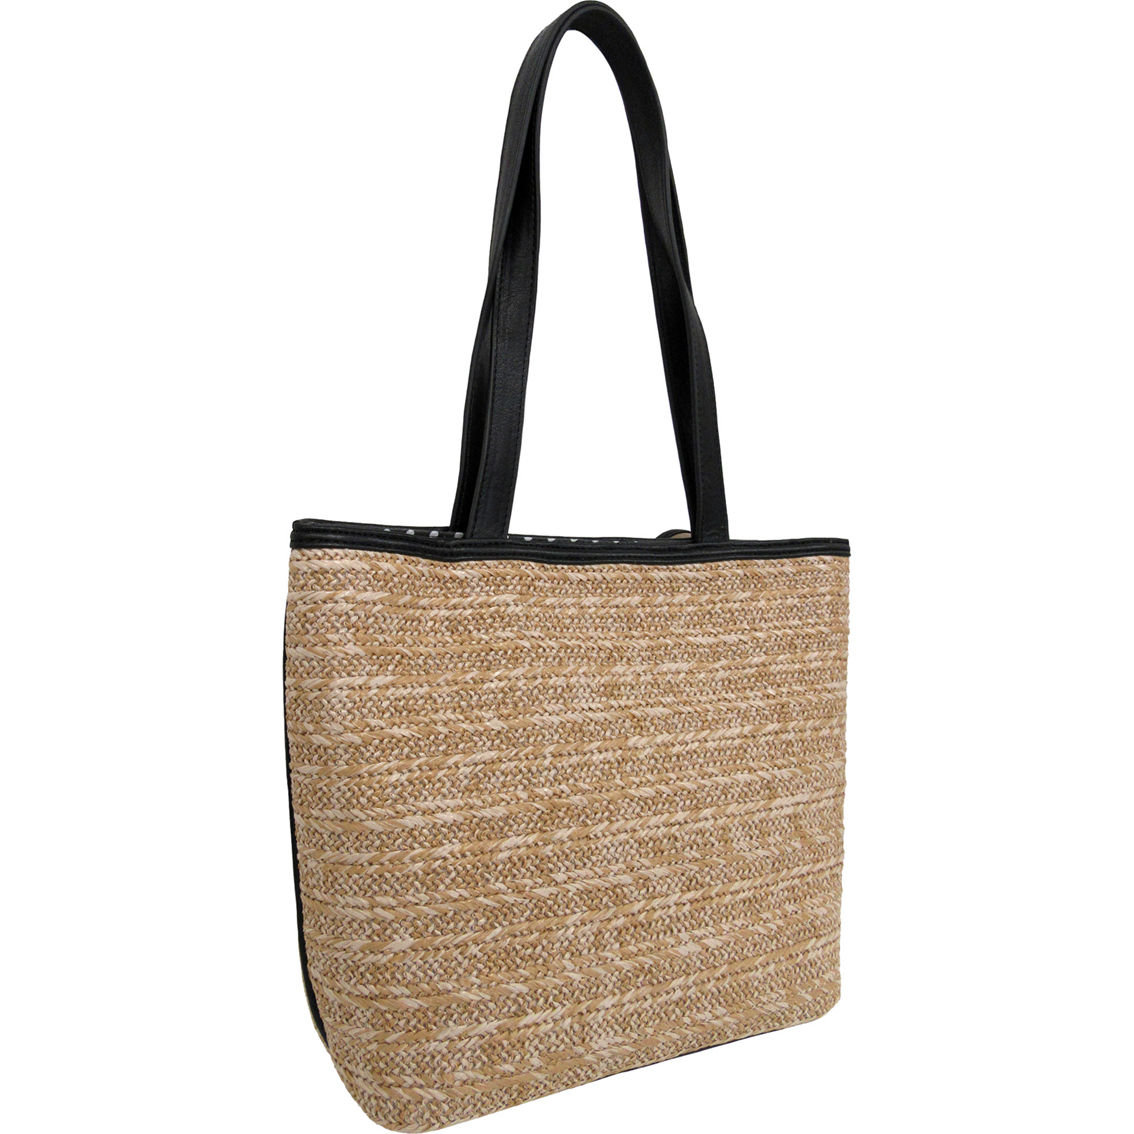 Bueno of California Straw Tote with Flower - Image 2 of 3